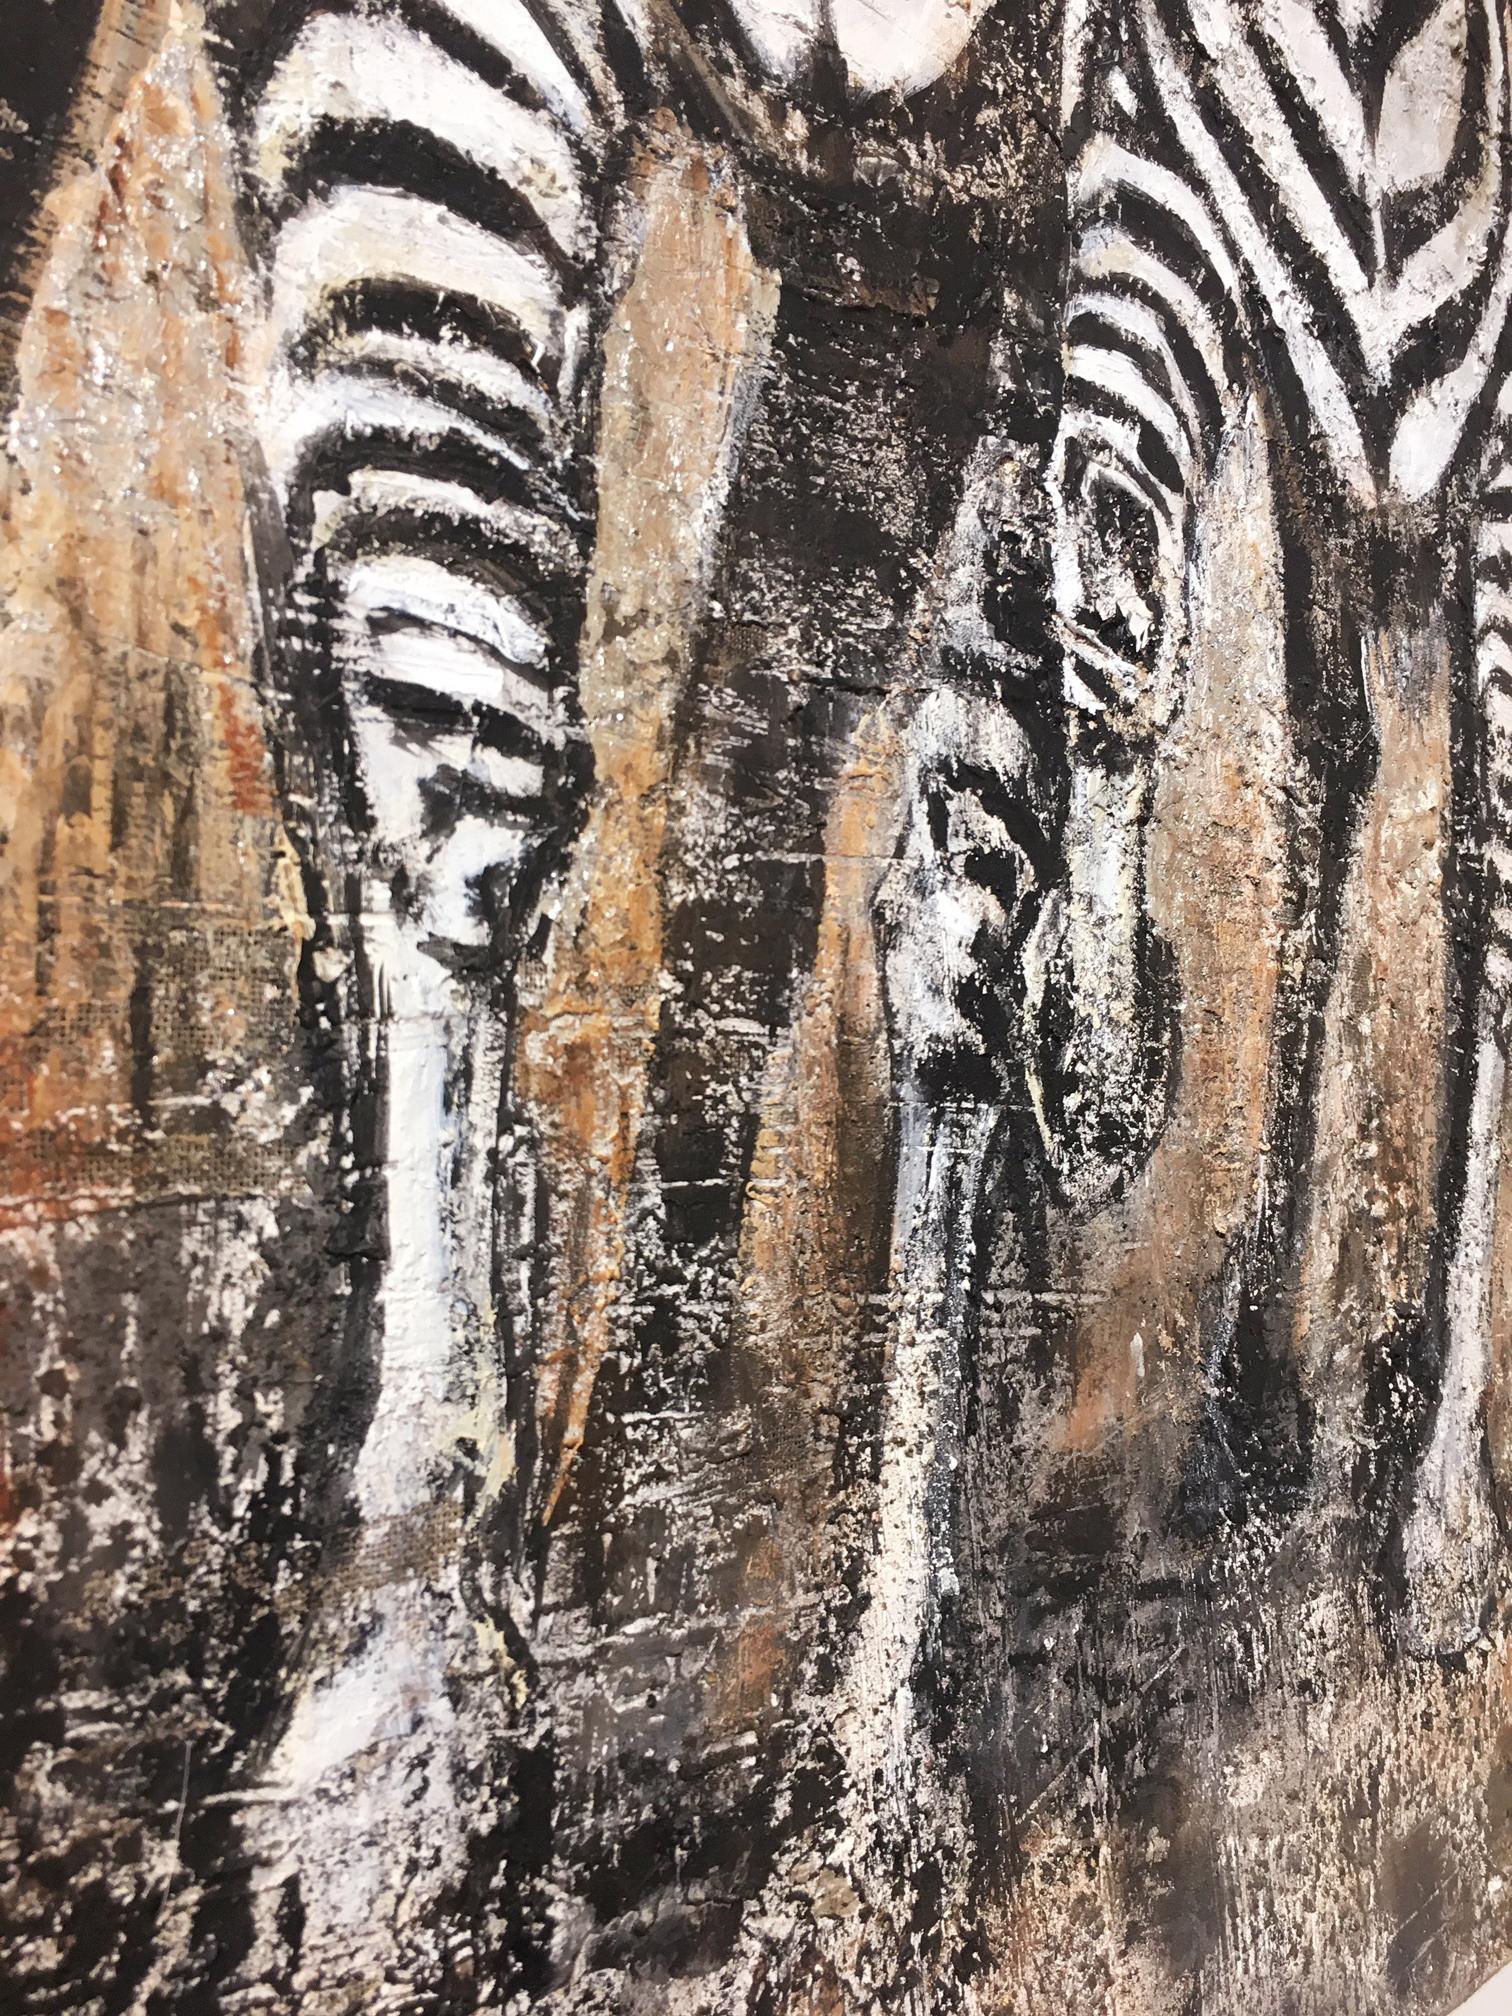 Canvas Zebras Painting For Sale